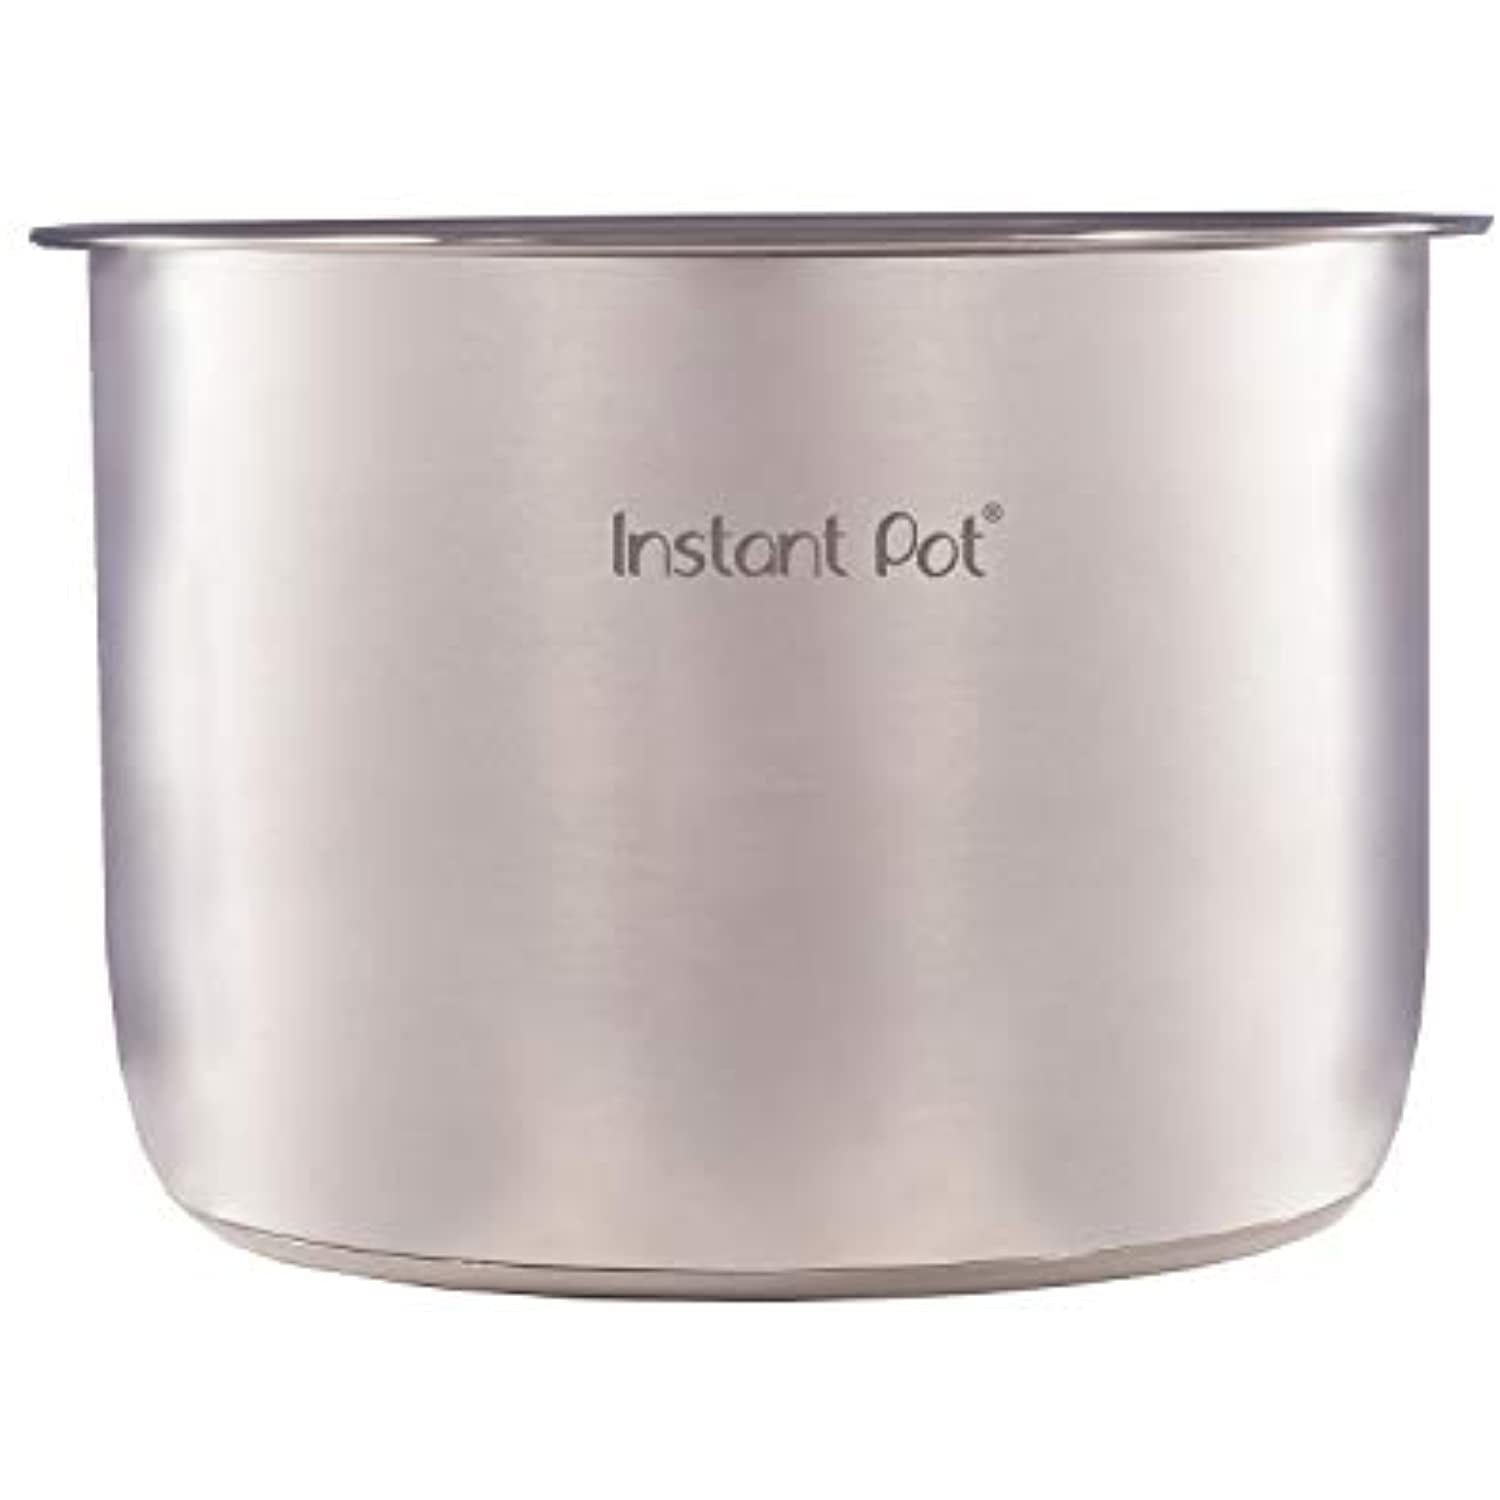  iAbler IP-Stainless Steel Inner Pot 8Qt for Instant Pot - Replacement  Pot for InstaPot Cooking Pot Stainless Steel Nonstick Pot for IP-DUO,  IP-LUX, IP-CSG, IP-ULTRA, IP-Pro 8 Quart: Home & Kitchen